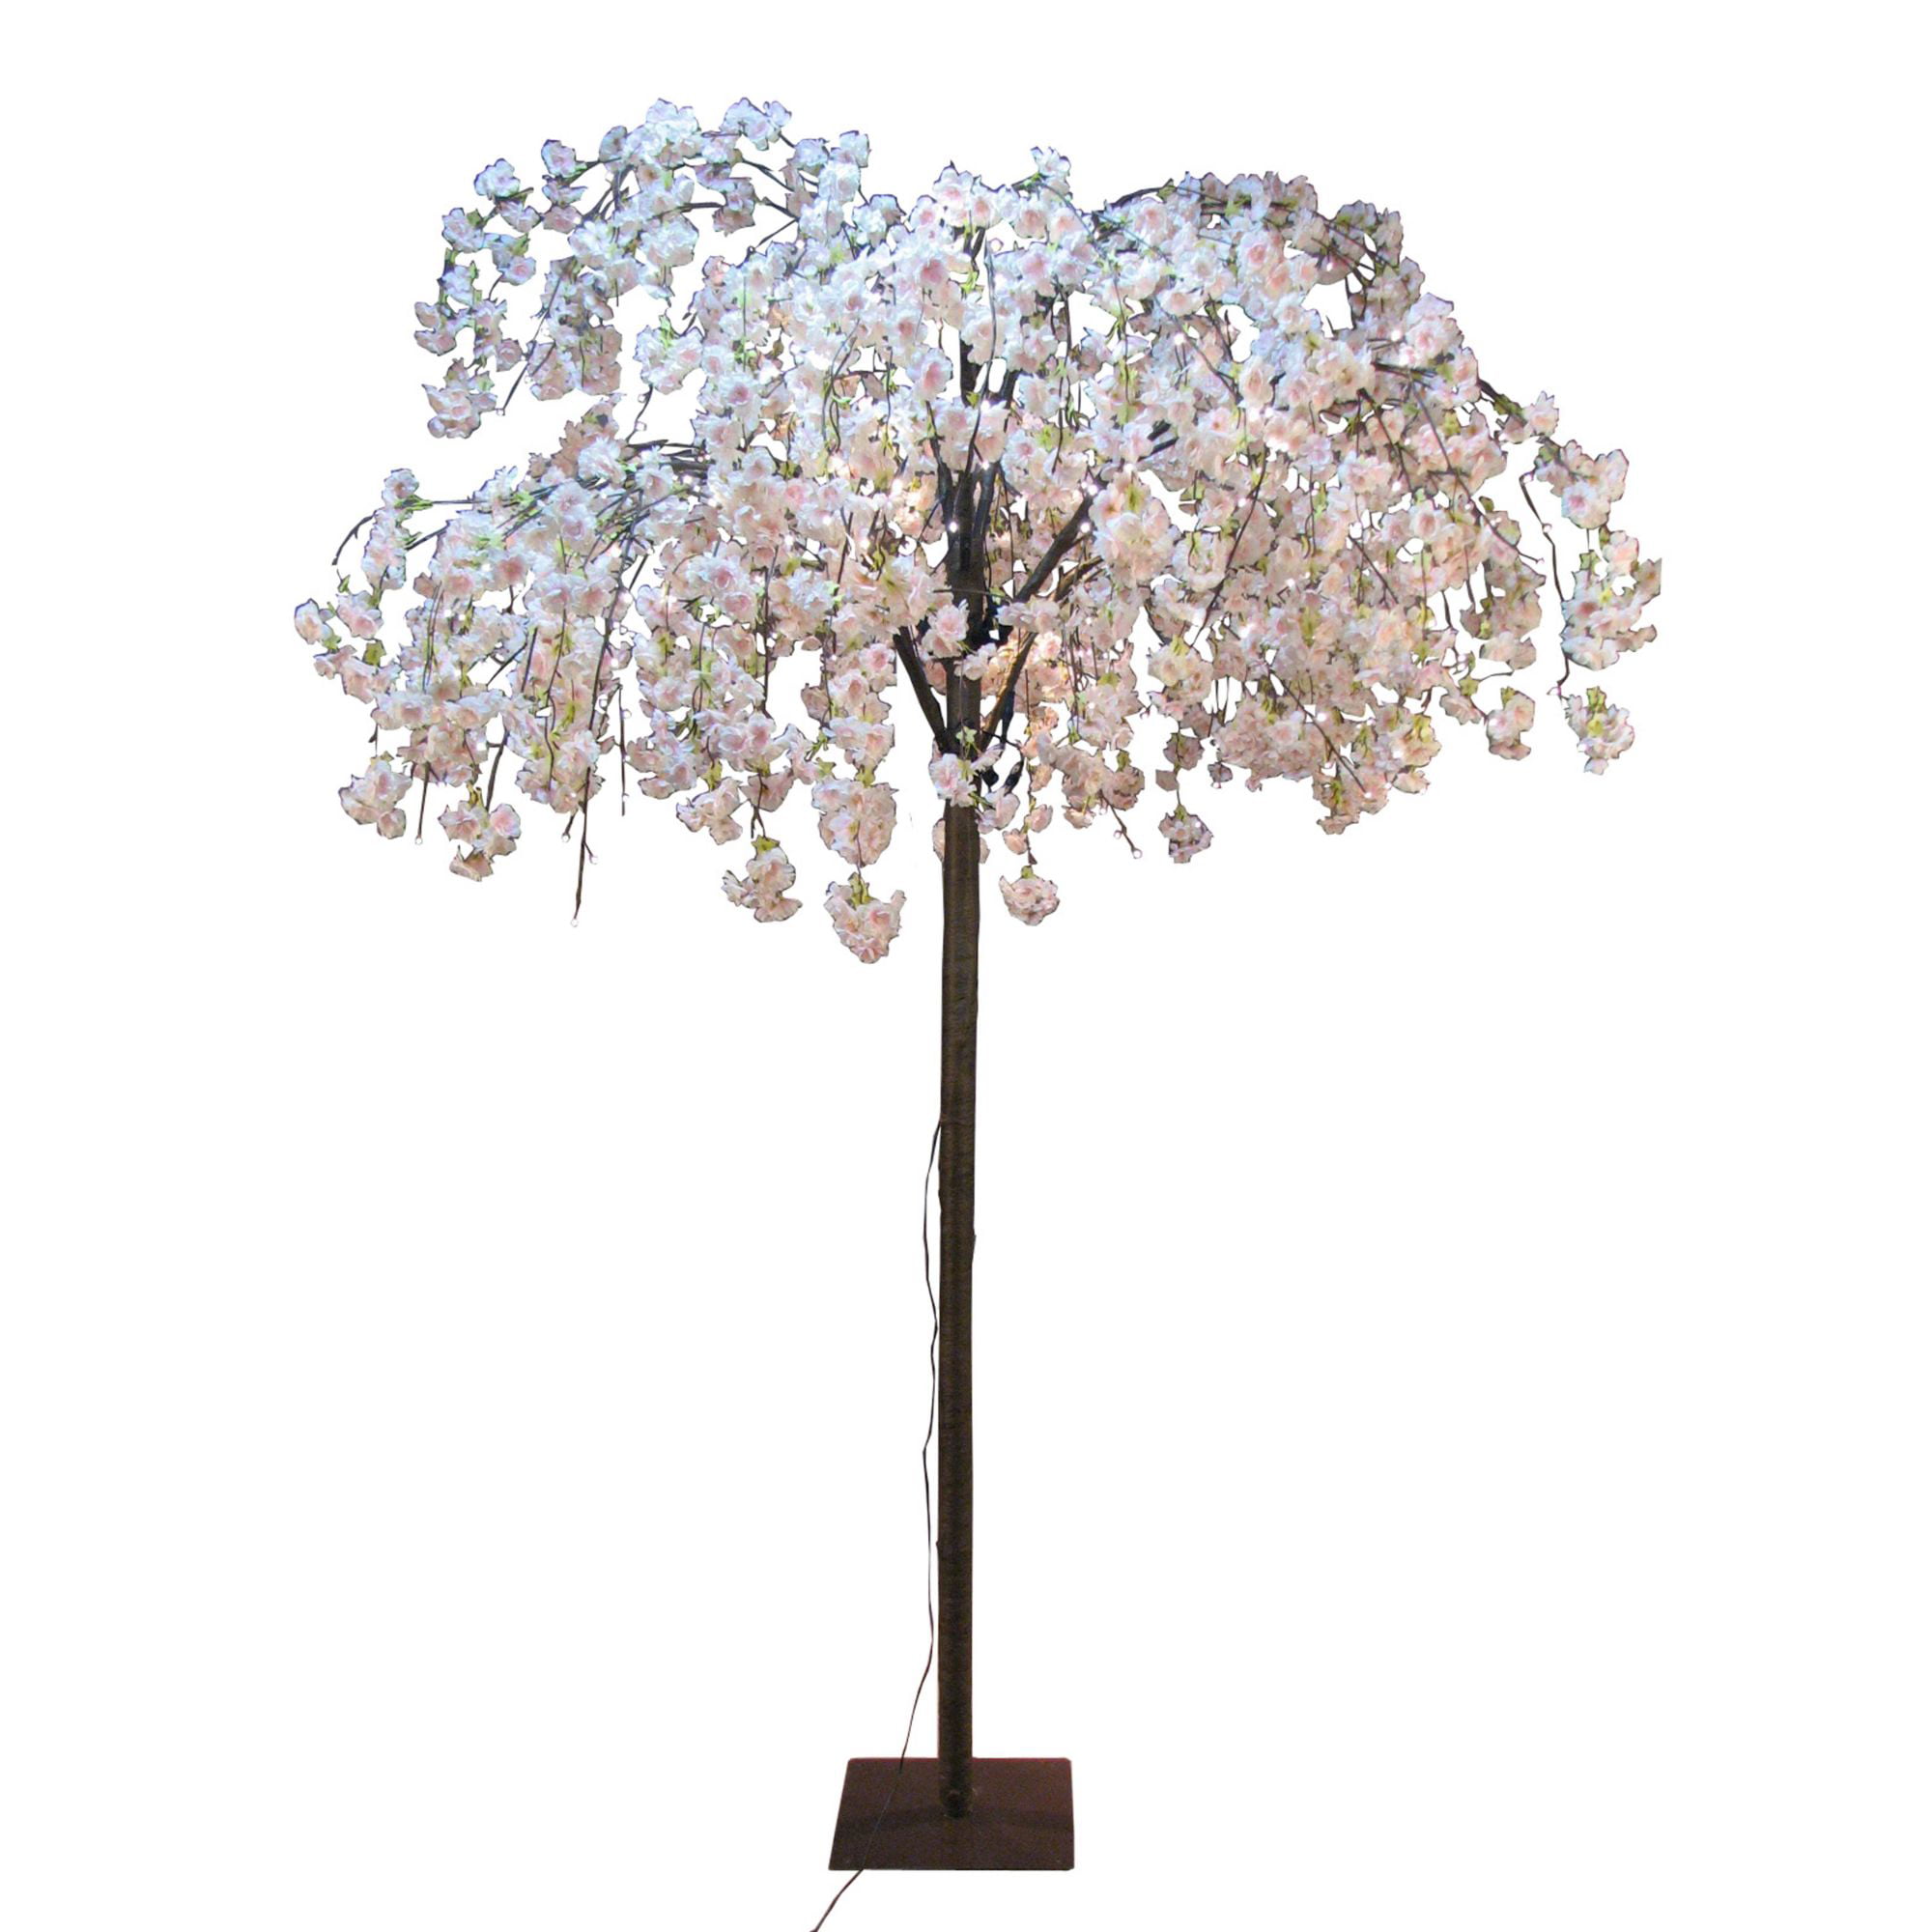 Christmas 6FT Luxury Cherry Blossom Tree 352 LED lights 8 Functions Multi colour 